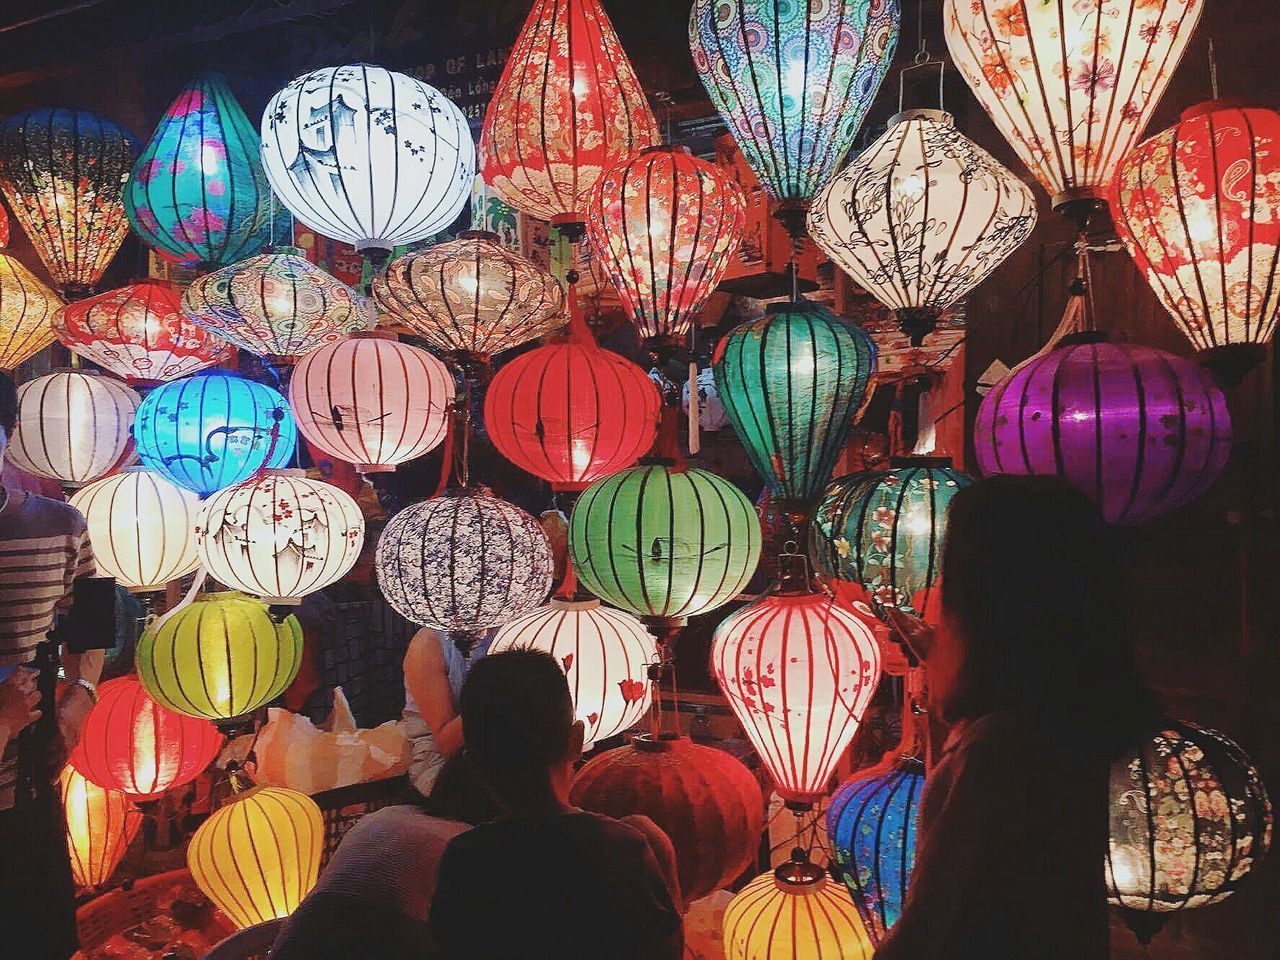 hanging, rear view, lantern, cultures, lighting equipment, red, place of worship, men, real people, adults only, chinese lantern, large group of people, paper lantern, chinese lantern festival, people, indoors, adult, day